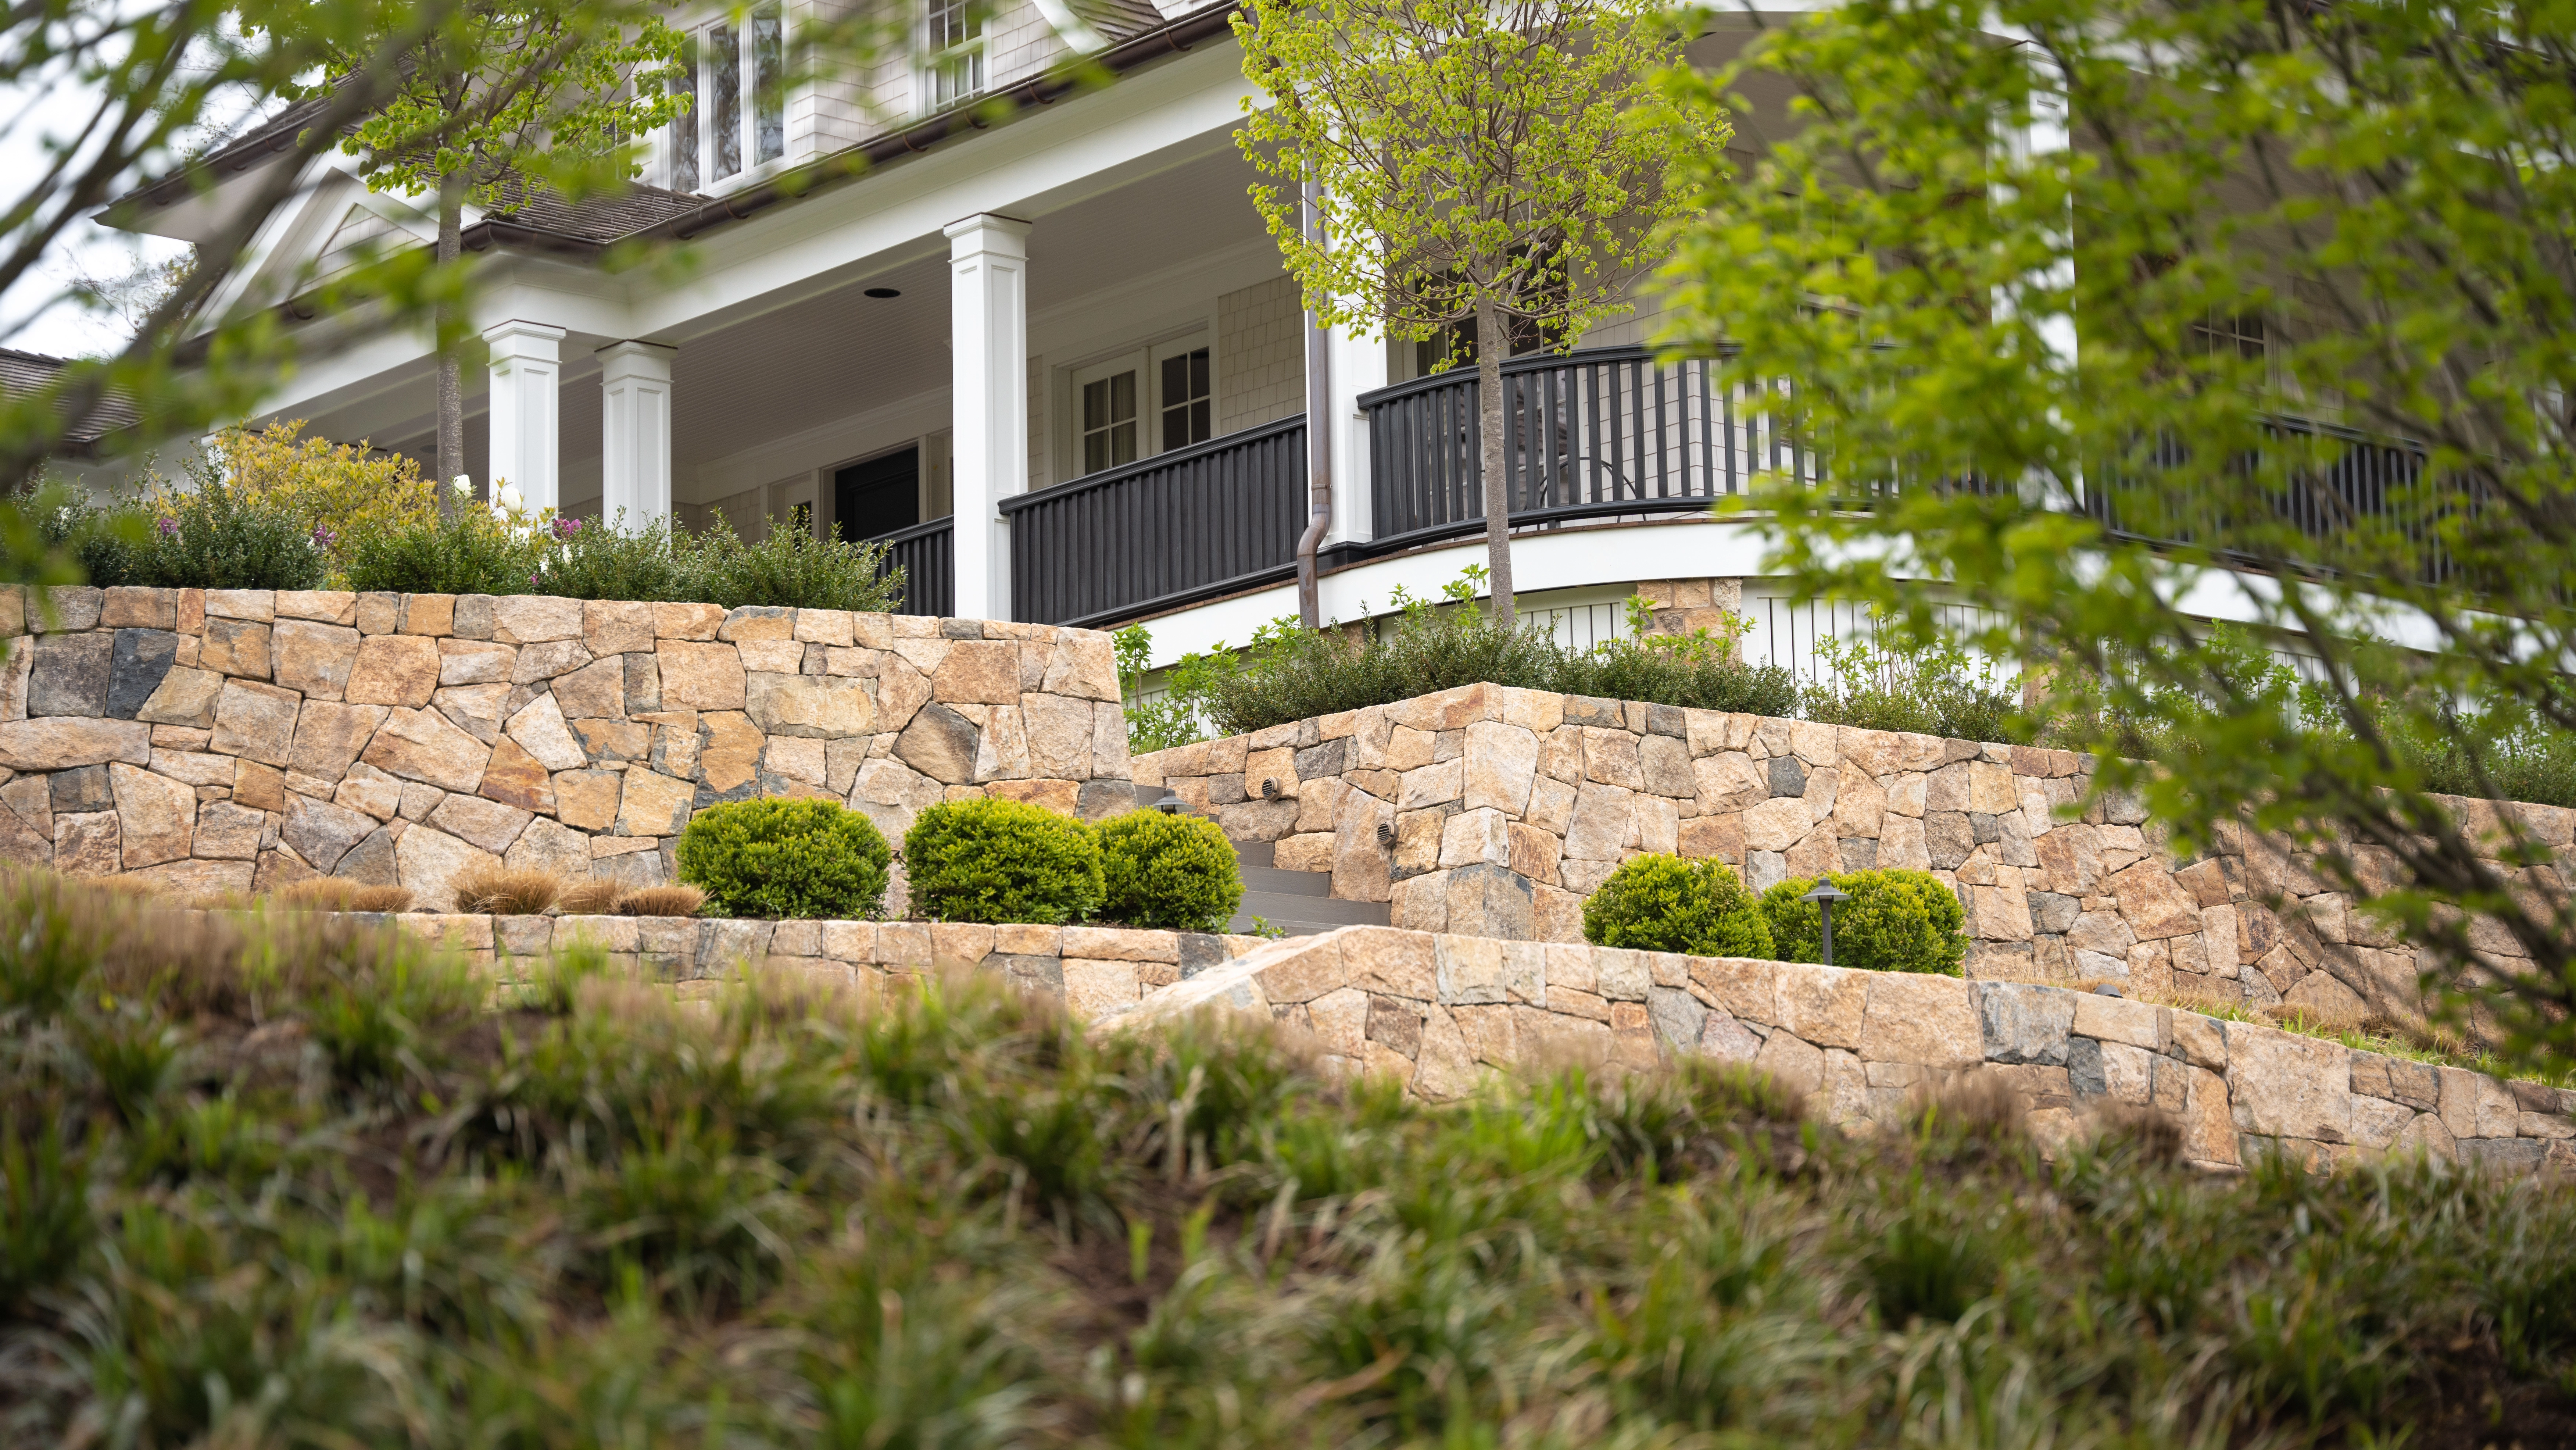 Retaining Walls Are the Solution to Your Sloped Yard!